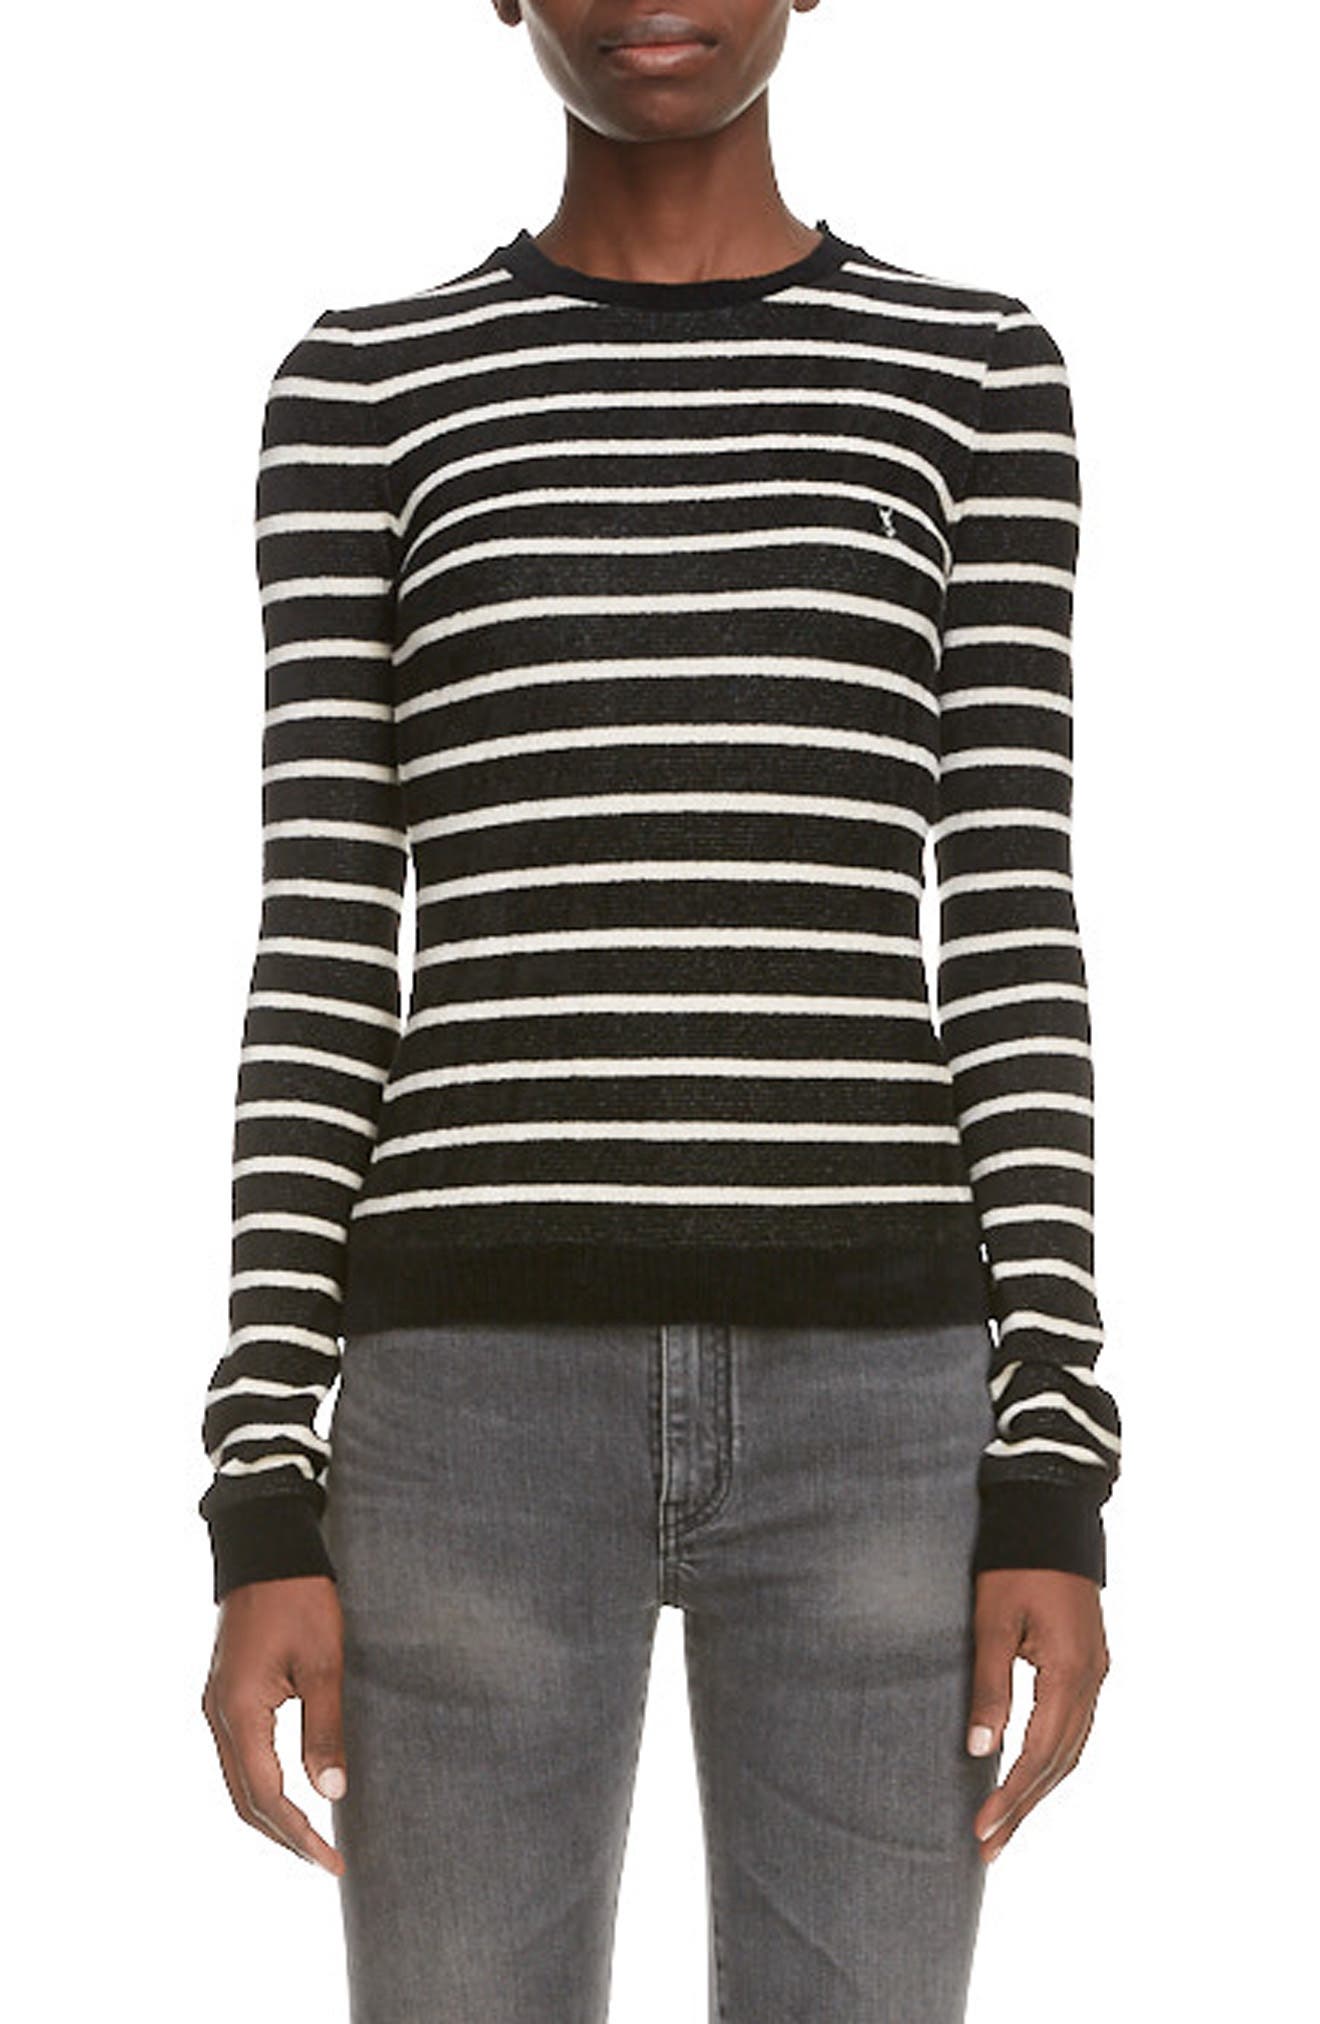 Saint Laurent Stripe Sweater in Noir/Natural at Nordstrom, Size X-Small